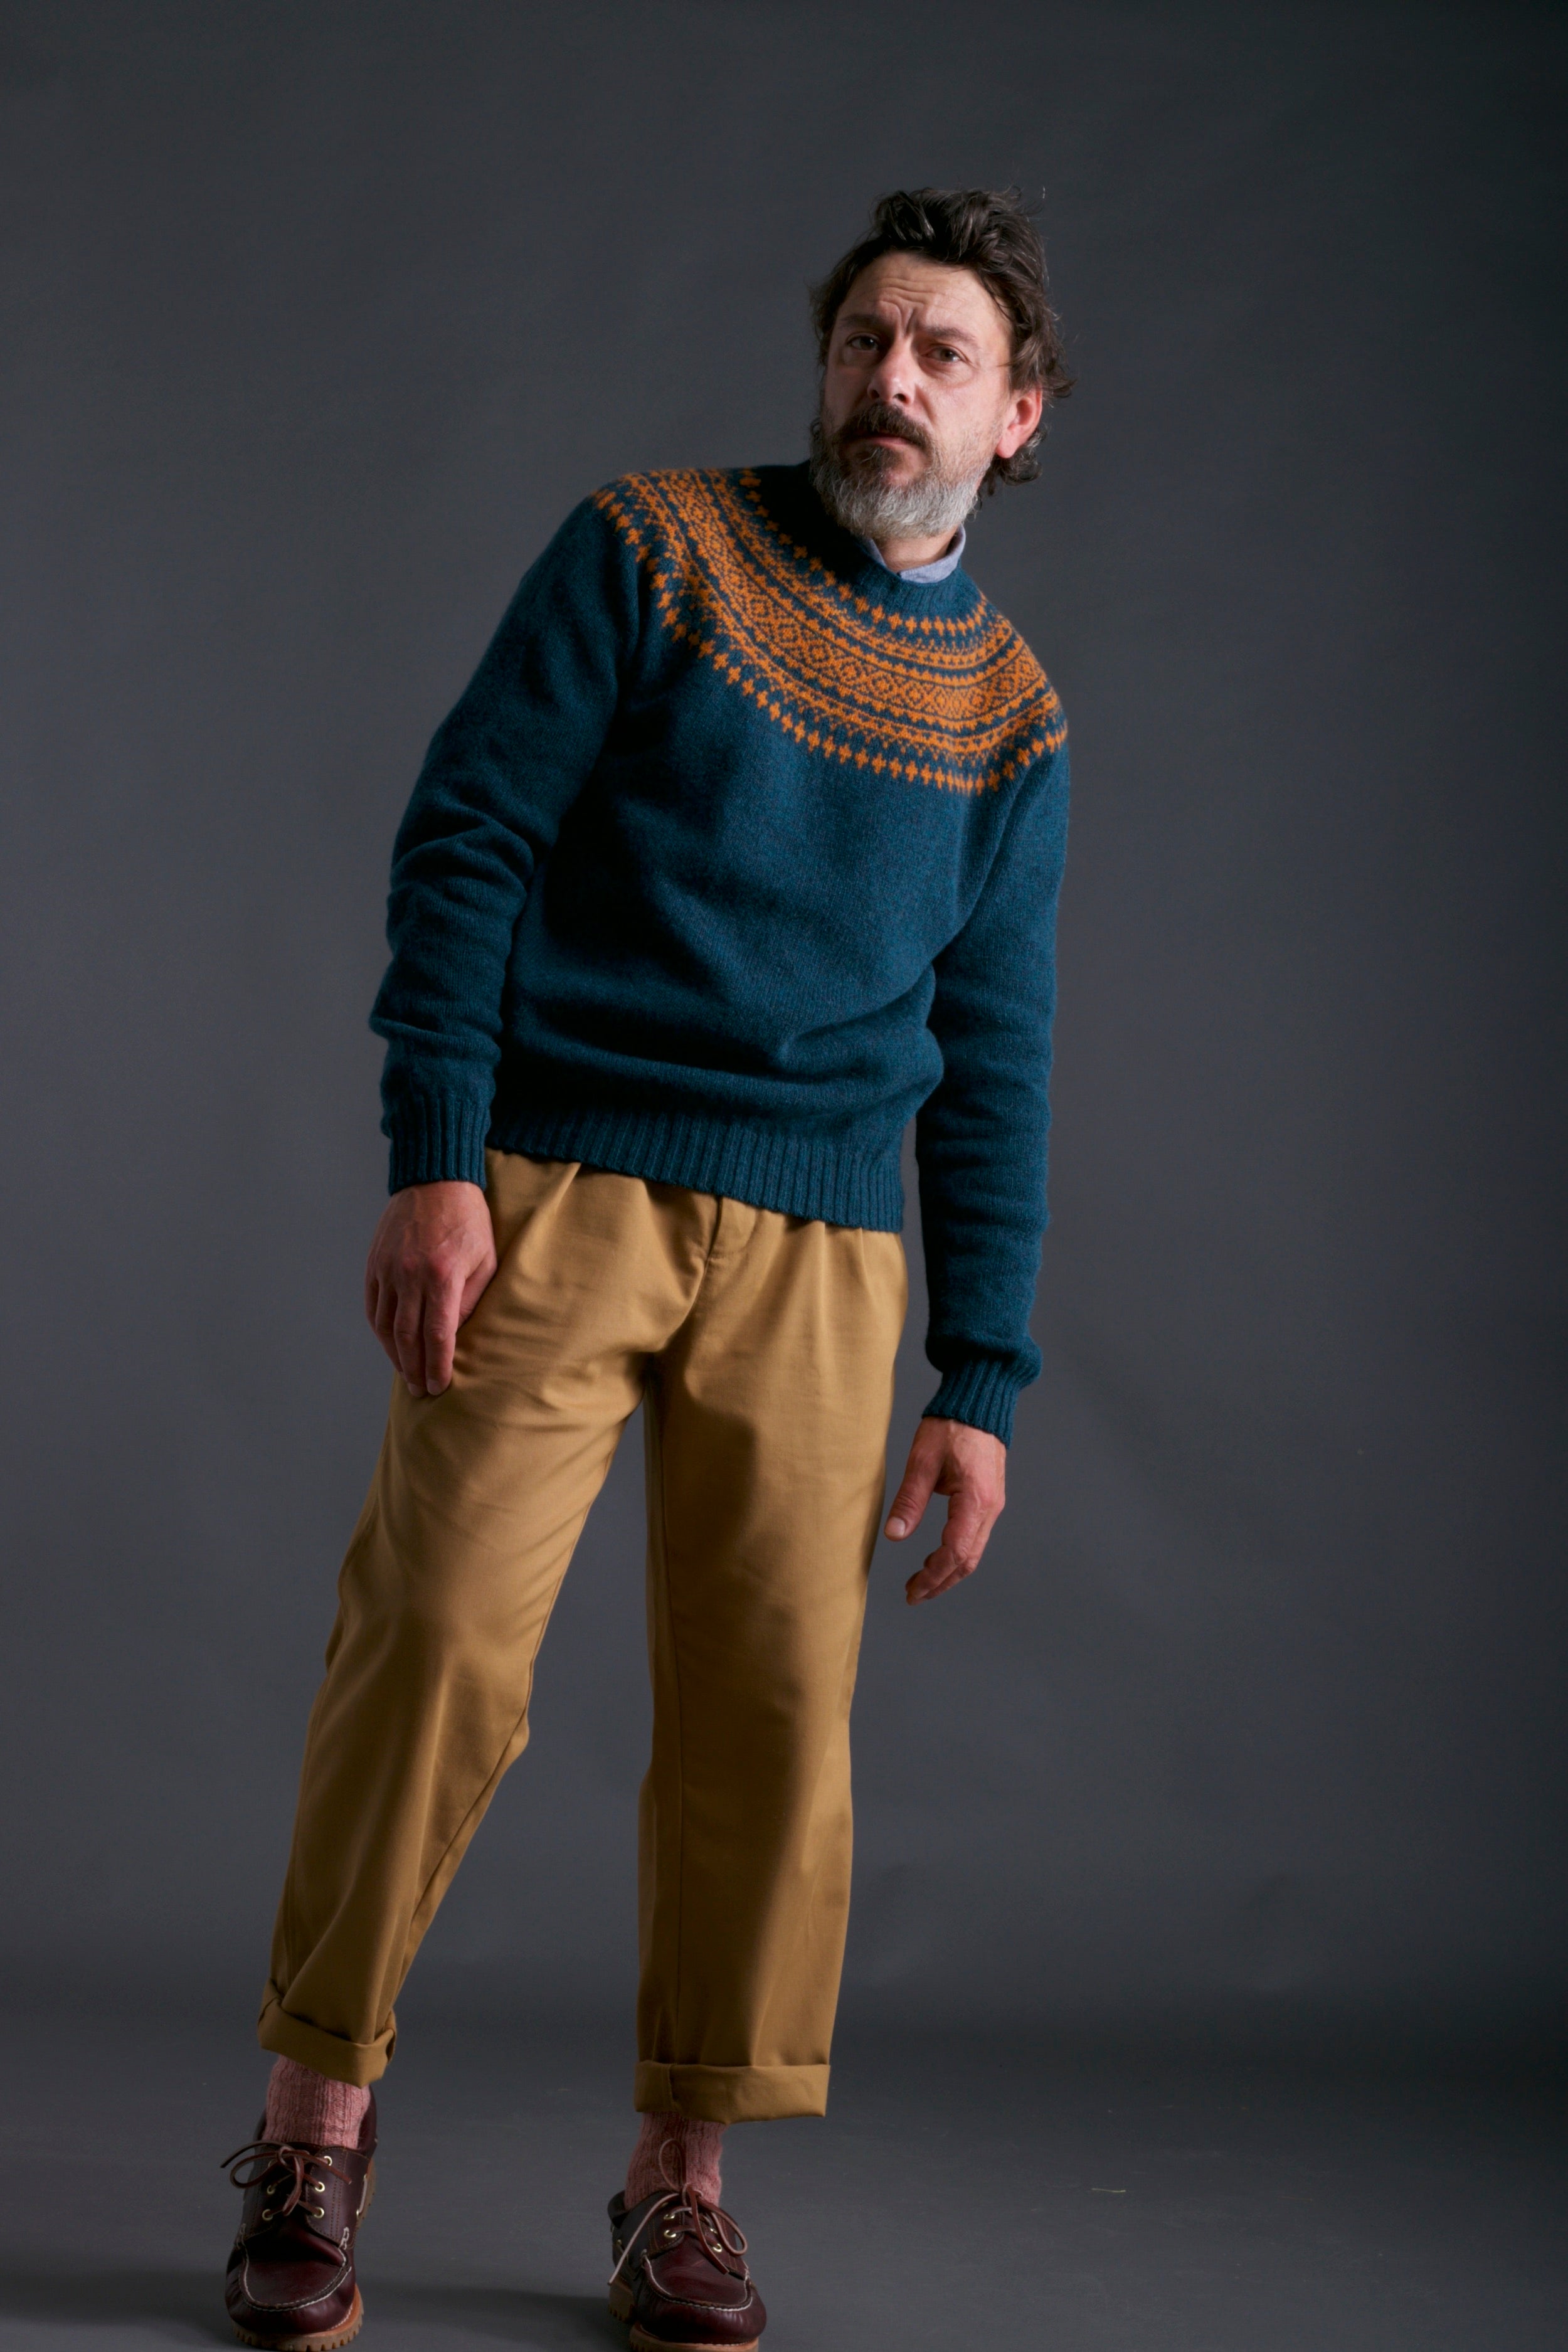 Man wears Carrier Company Shetland Yoke Jumper in ginger and Teal with Mens Work Trouser in Tan